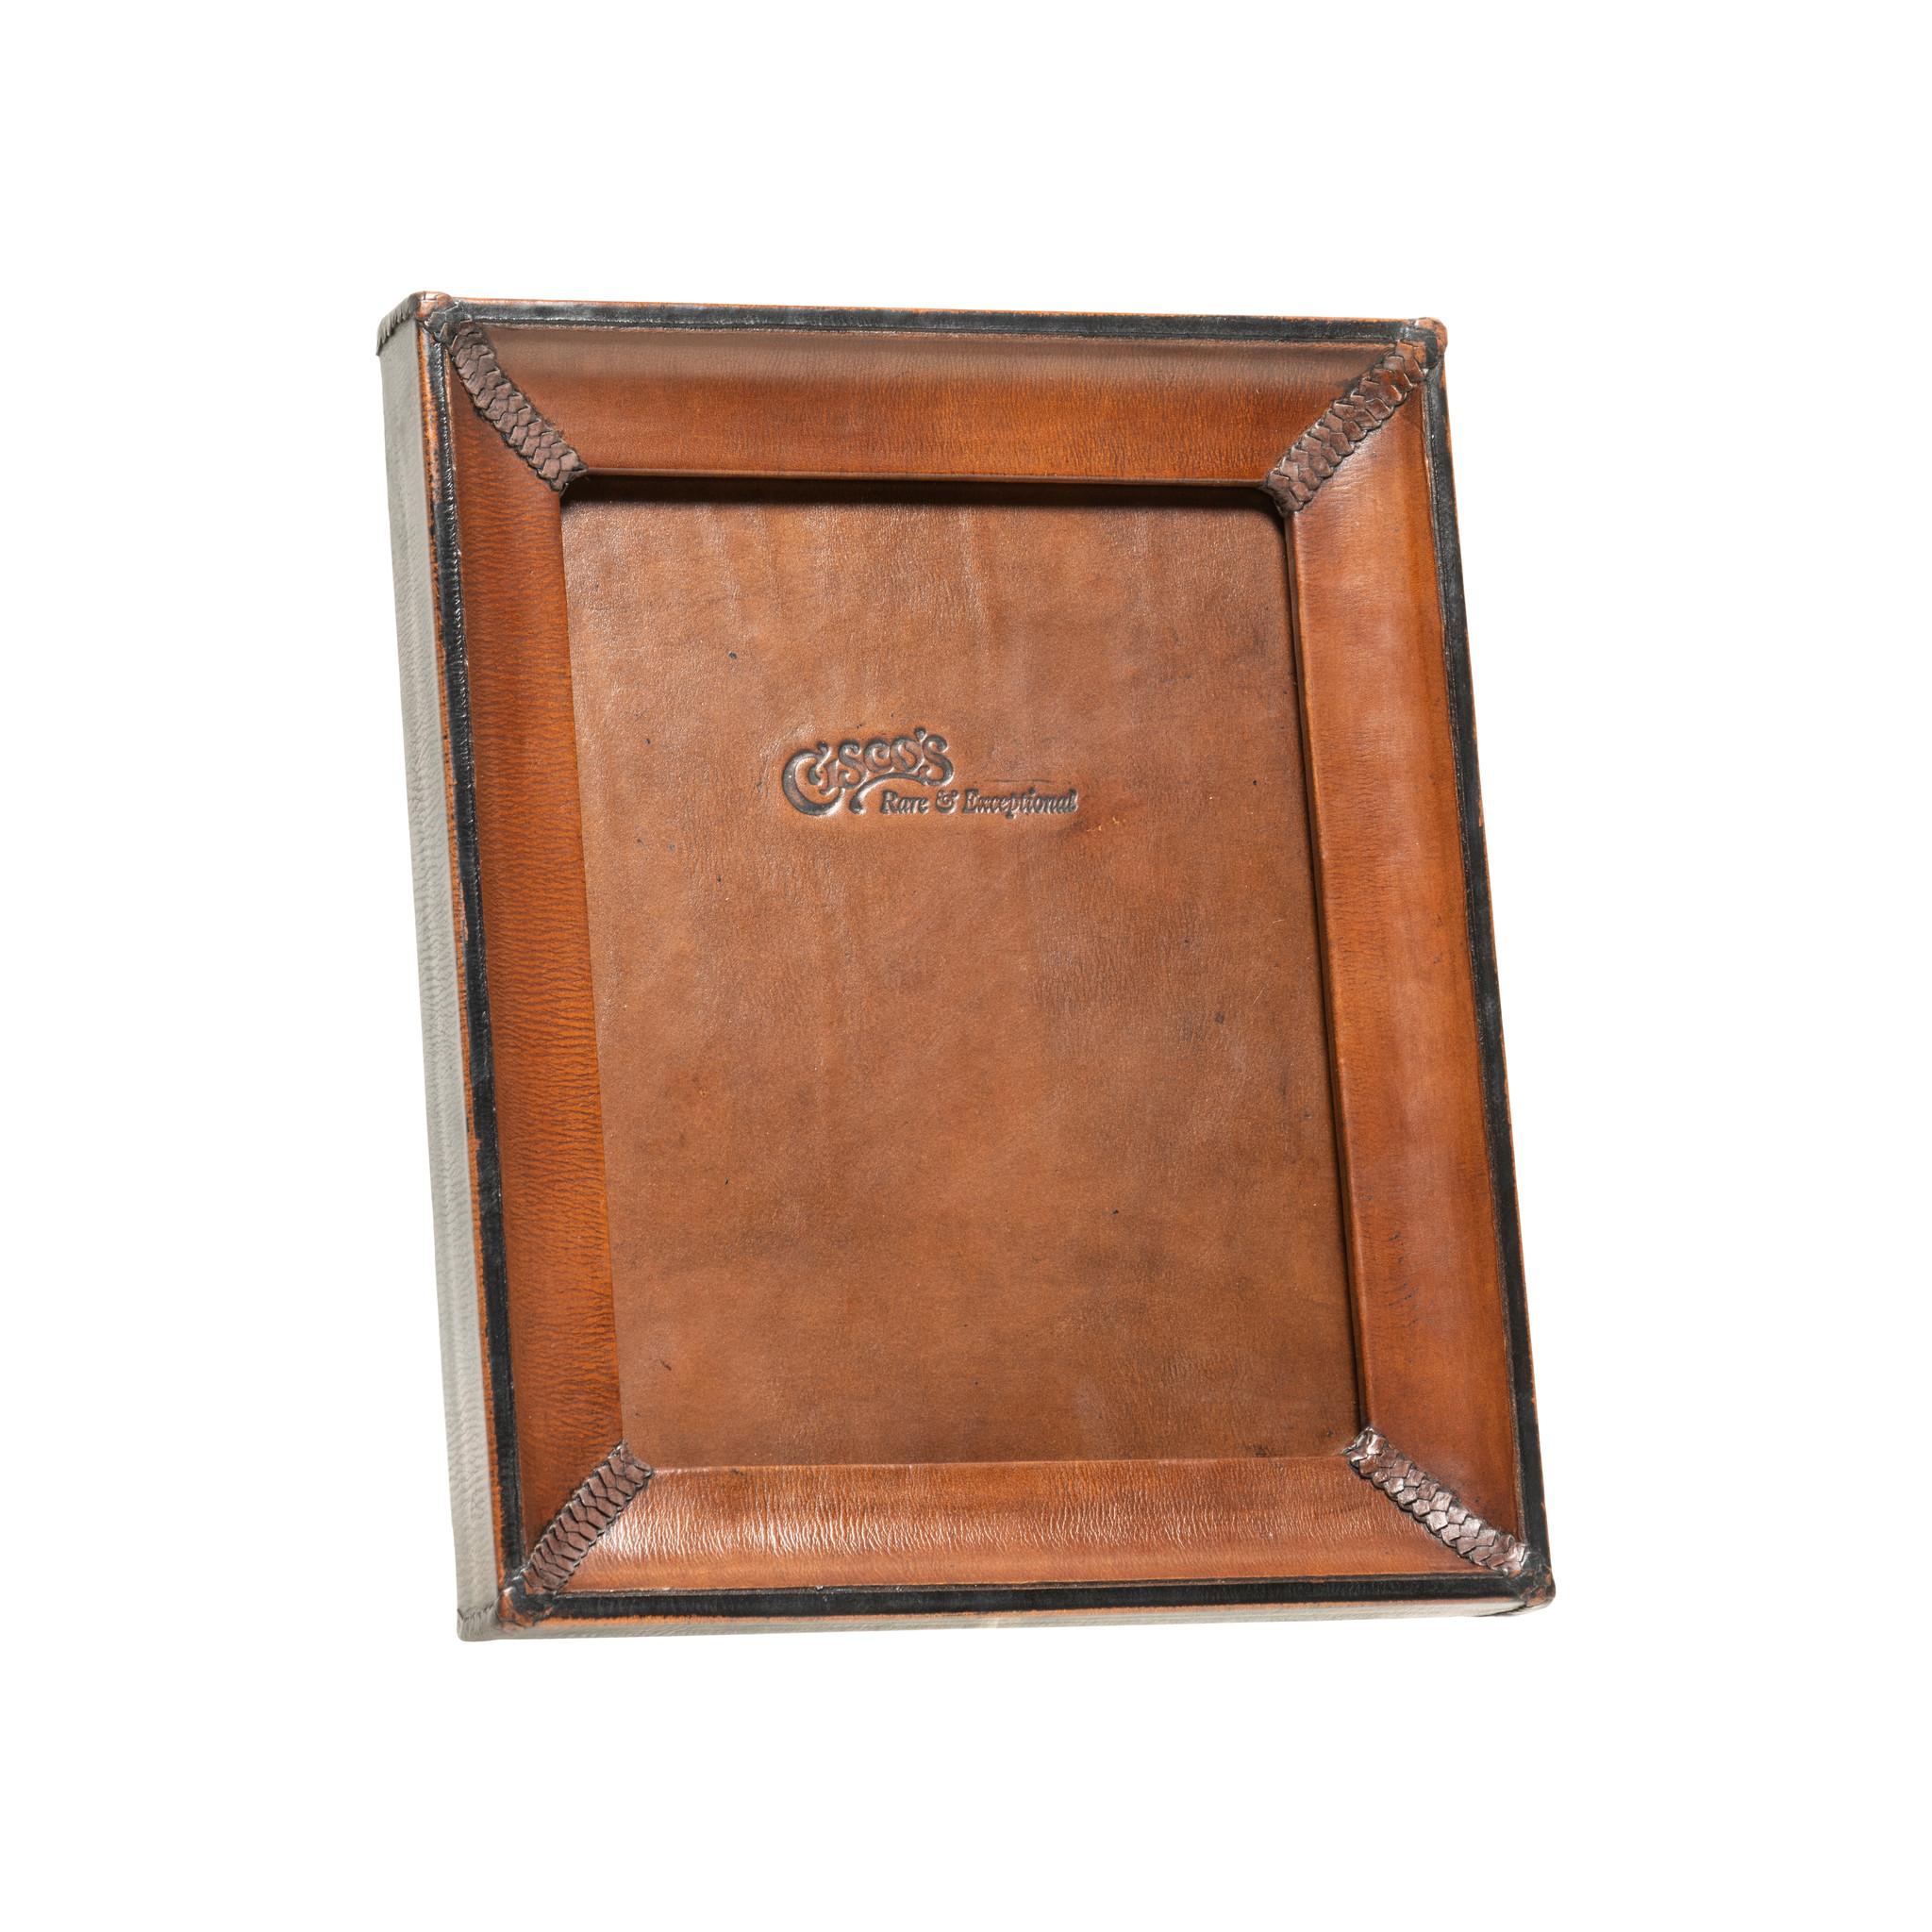 5x7 medium brown and black leather tabletop picture frame. Cisco's premium leather picture frames add the perfect accent to any home or office. Each frame is skillfully crafted by artisan saddle makers using genuine cowhide. Color: Dark brown with